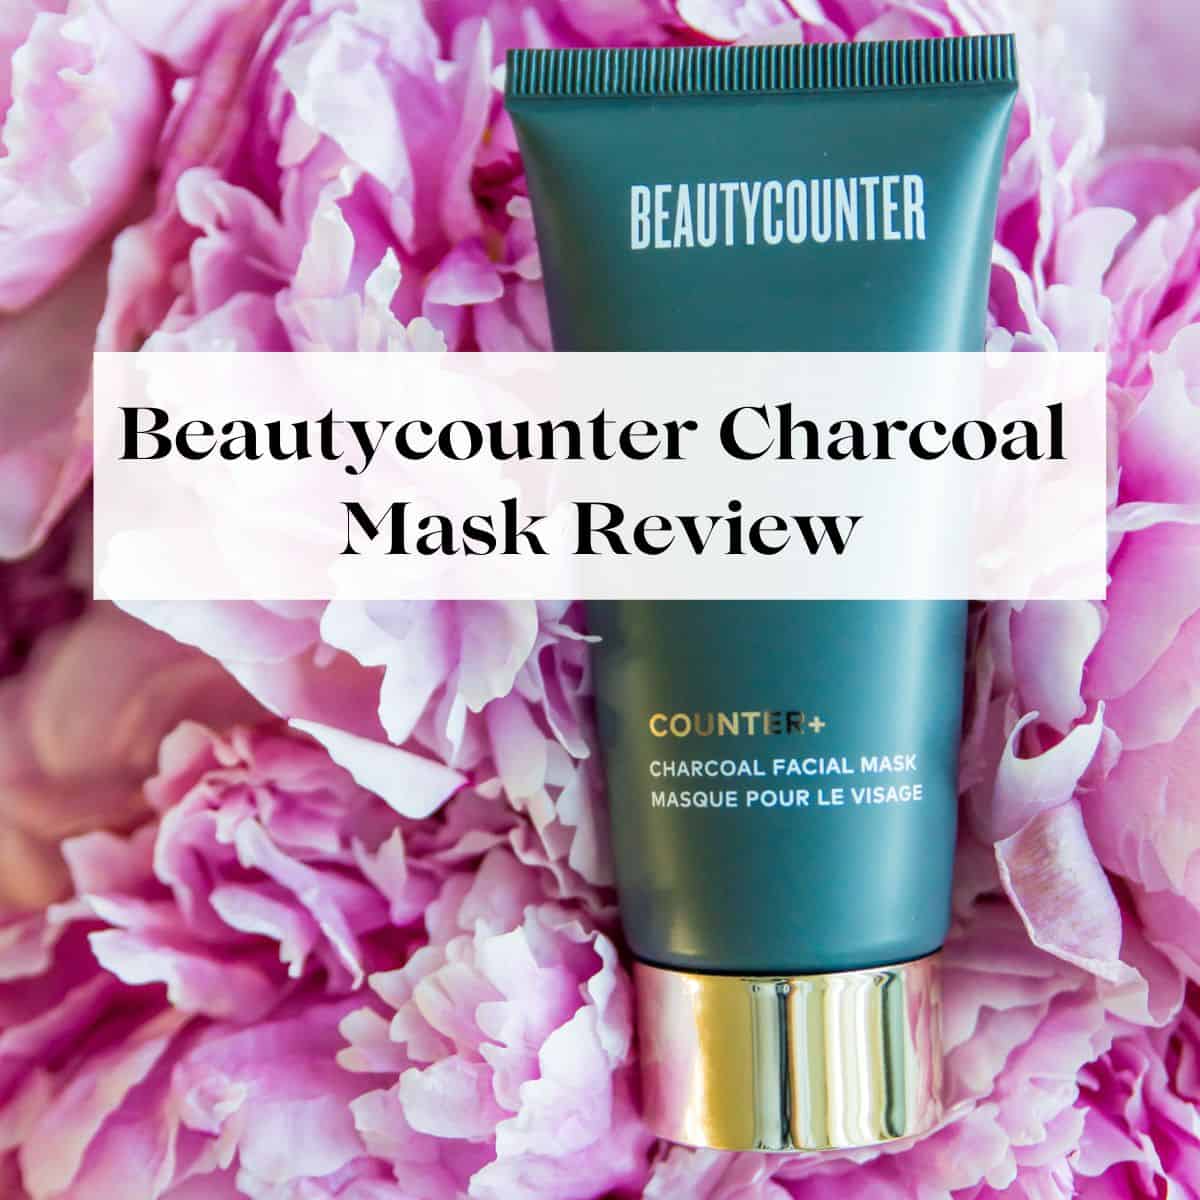 A tube of Beautycounter's charcoal mask on a batch of pink peonies with the title Beautycounter Charcoal Mask Review over it.